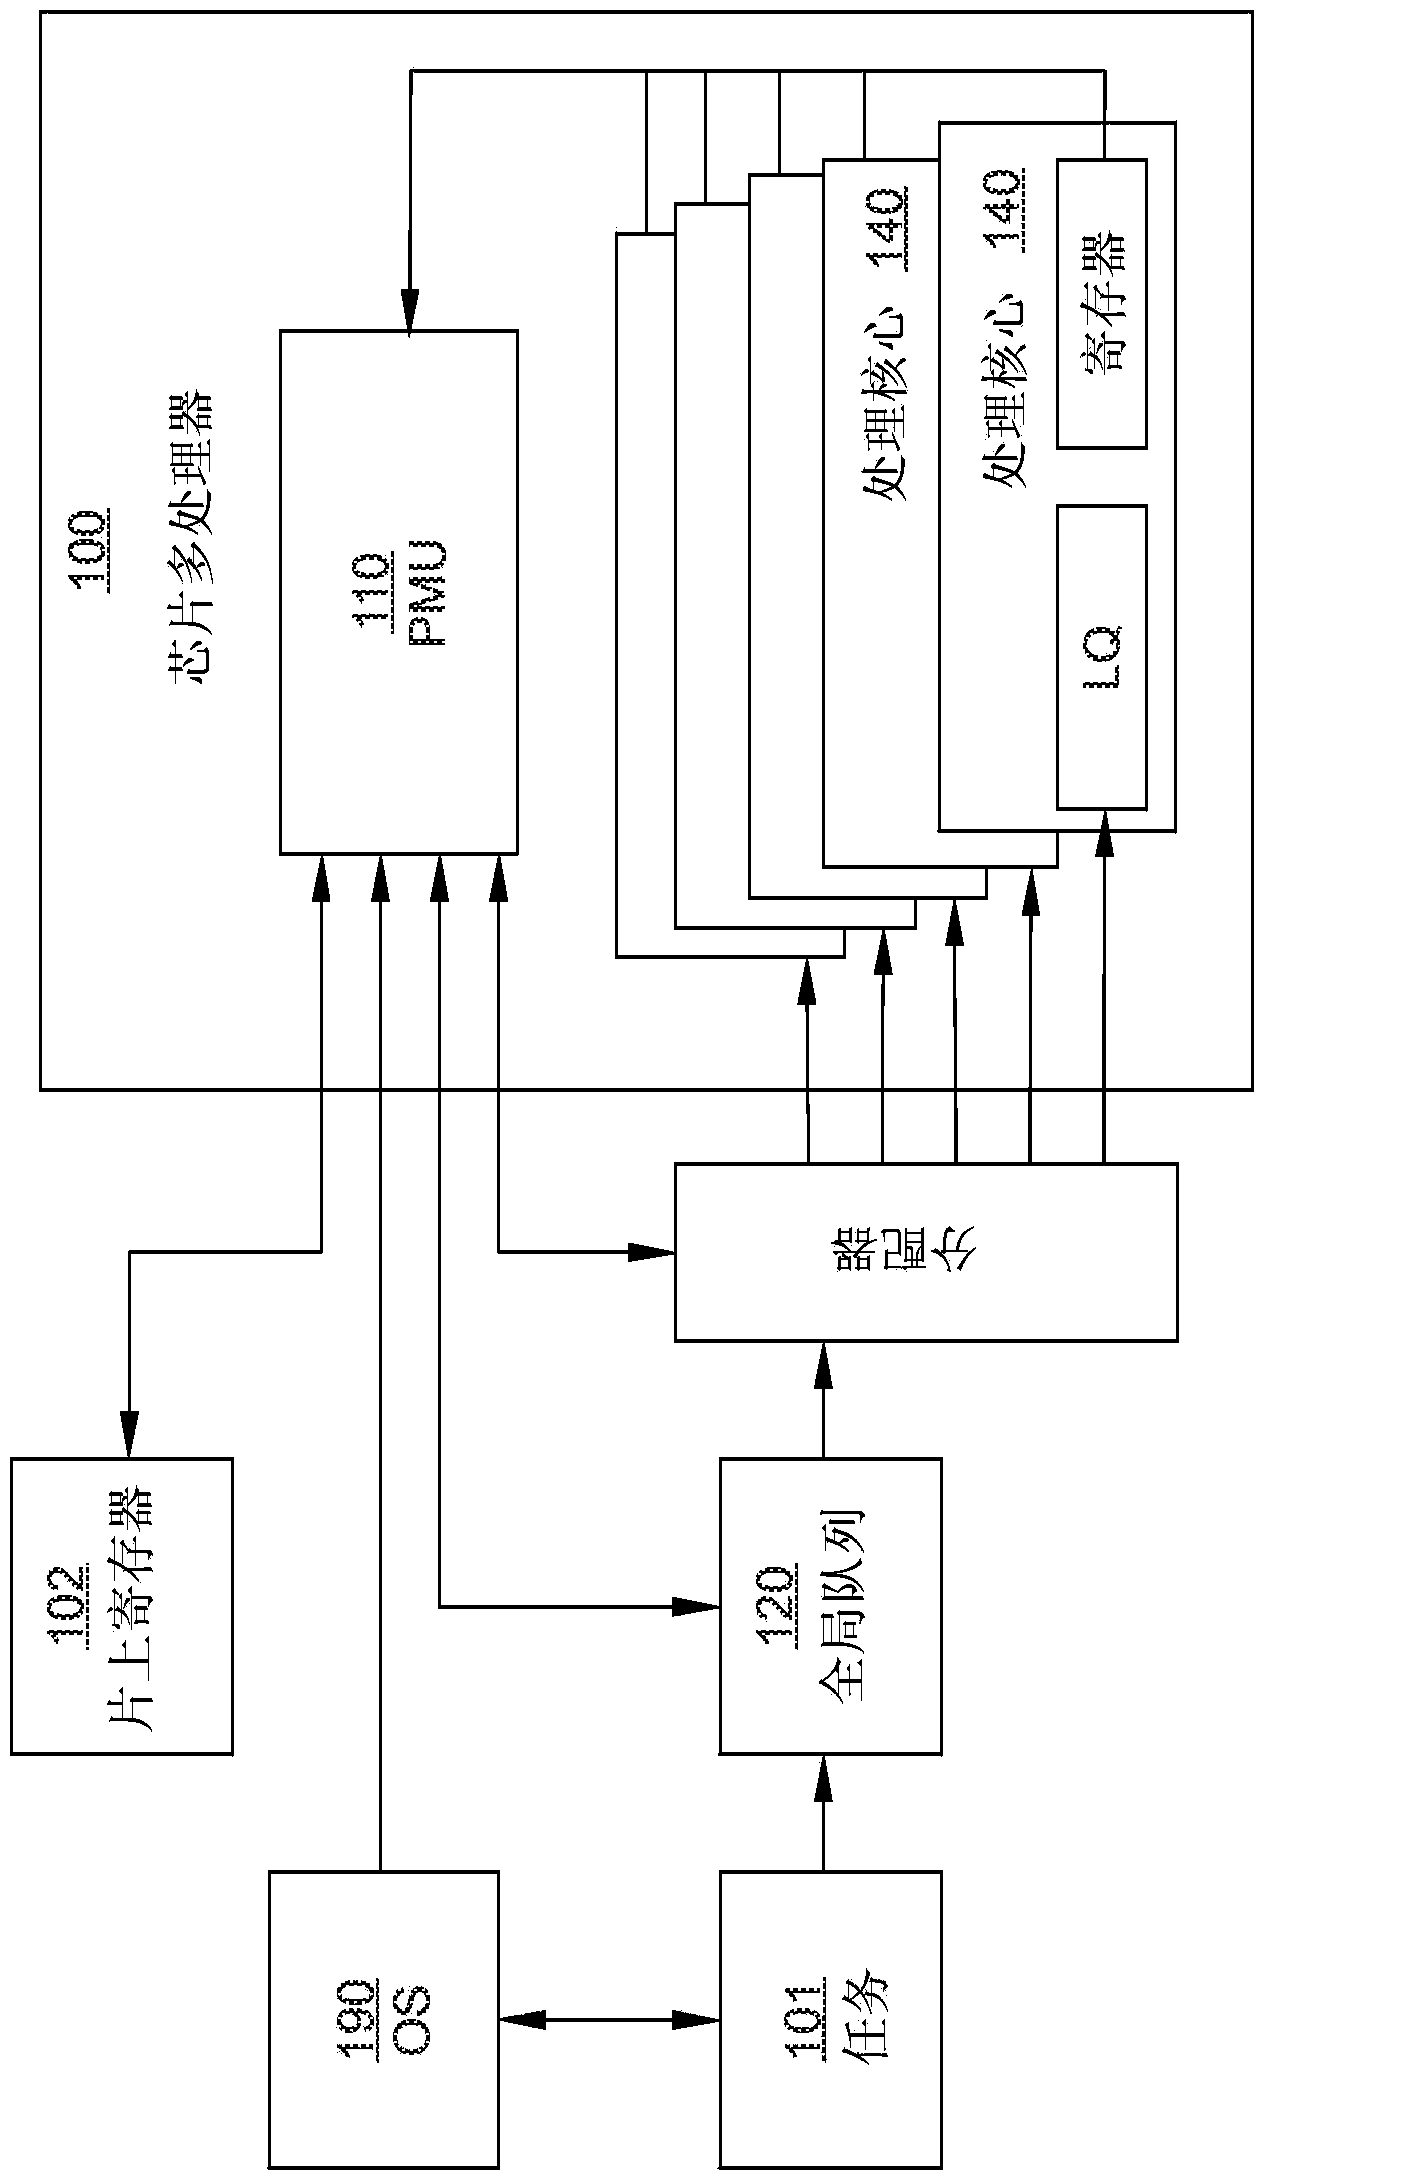 Core-level dynamic voltage and frequency scaling in a chip multiprocessor